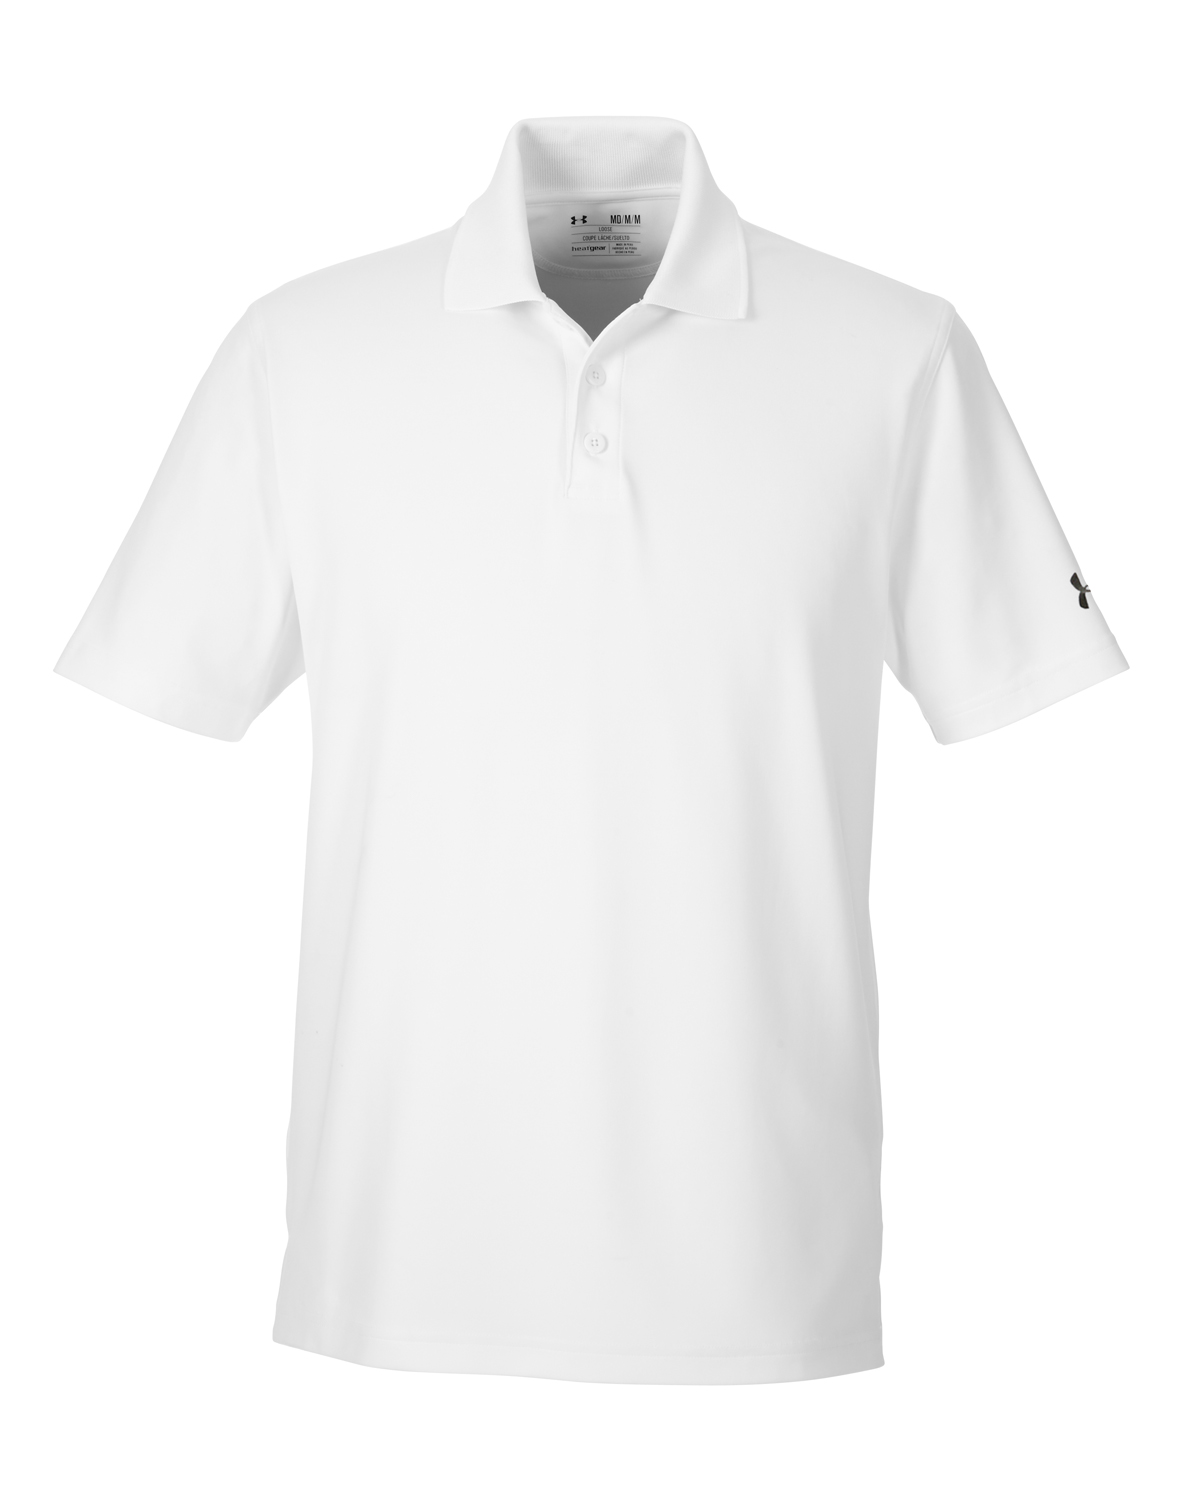 under armour corporate performance polo